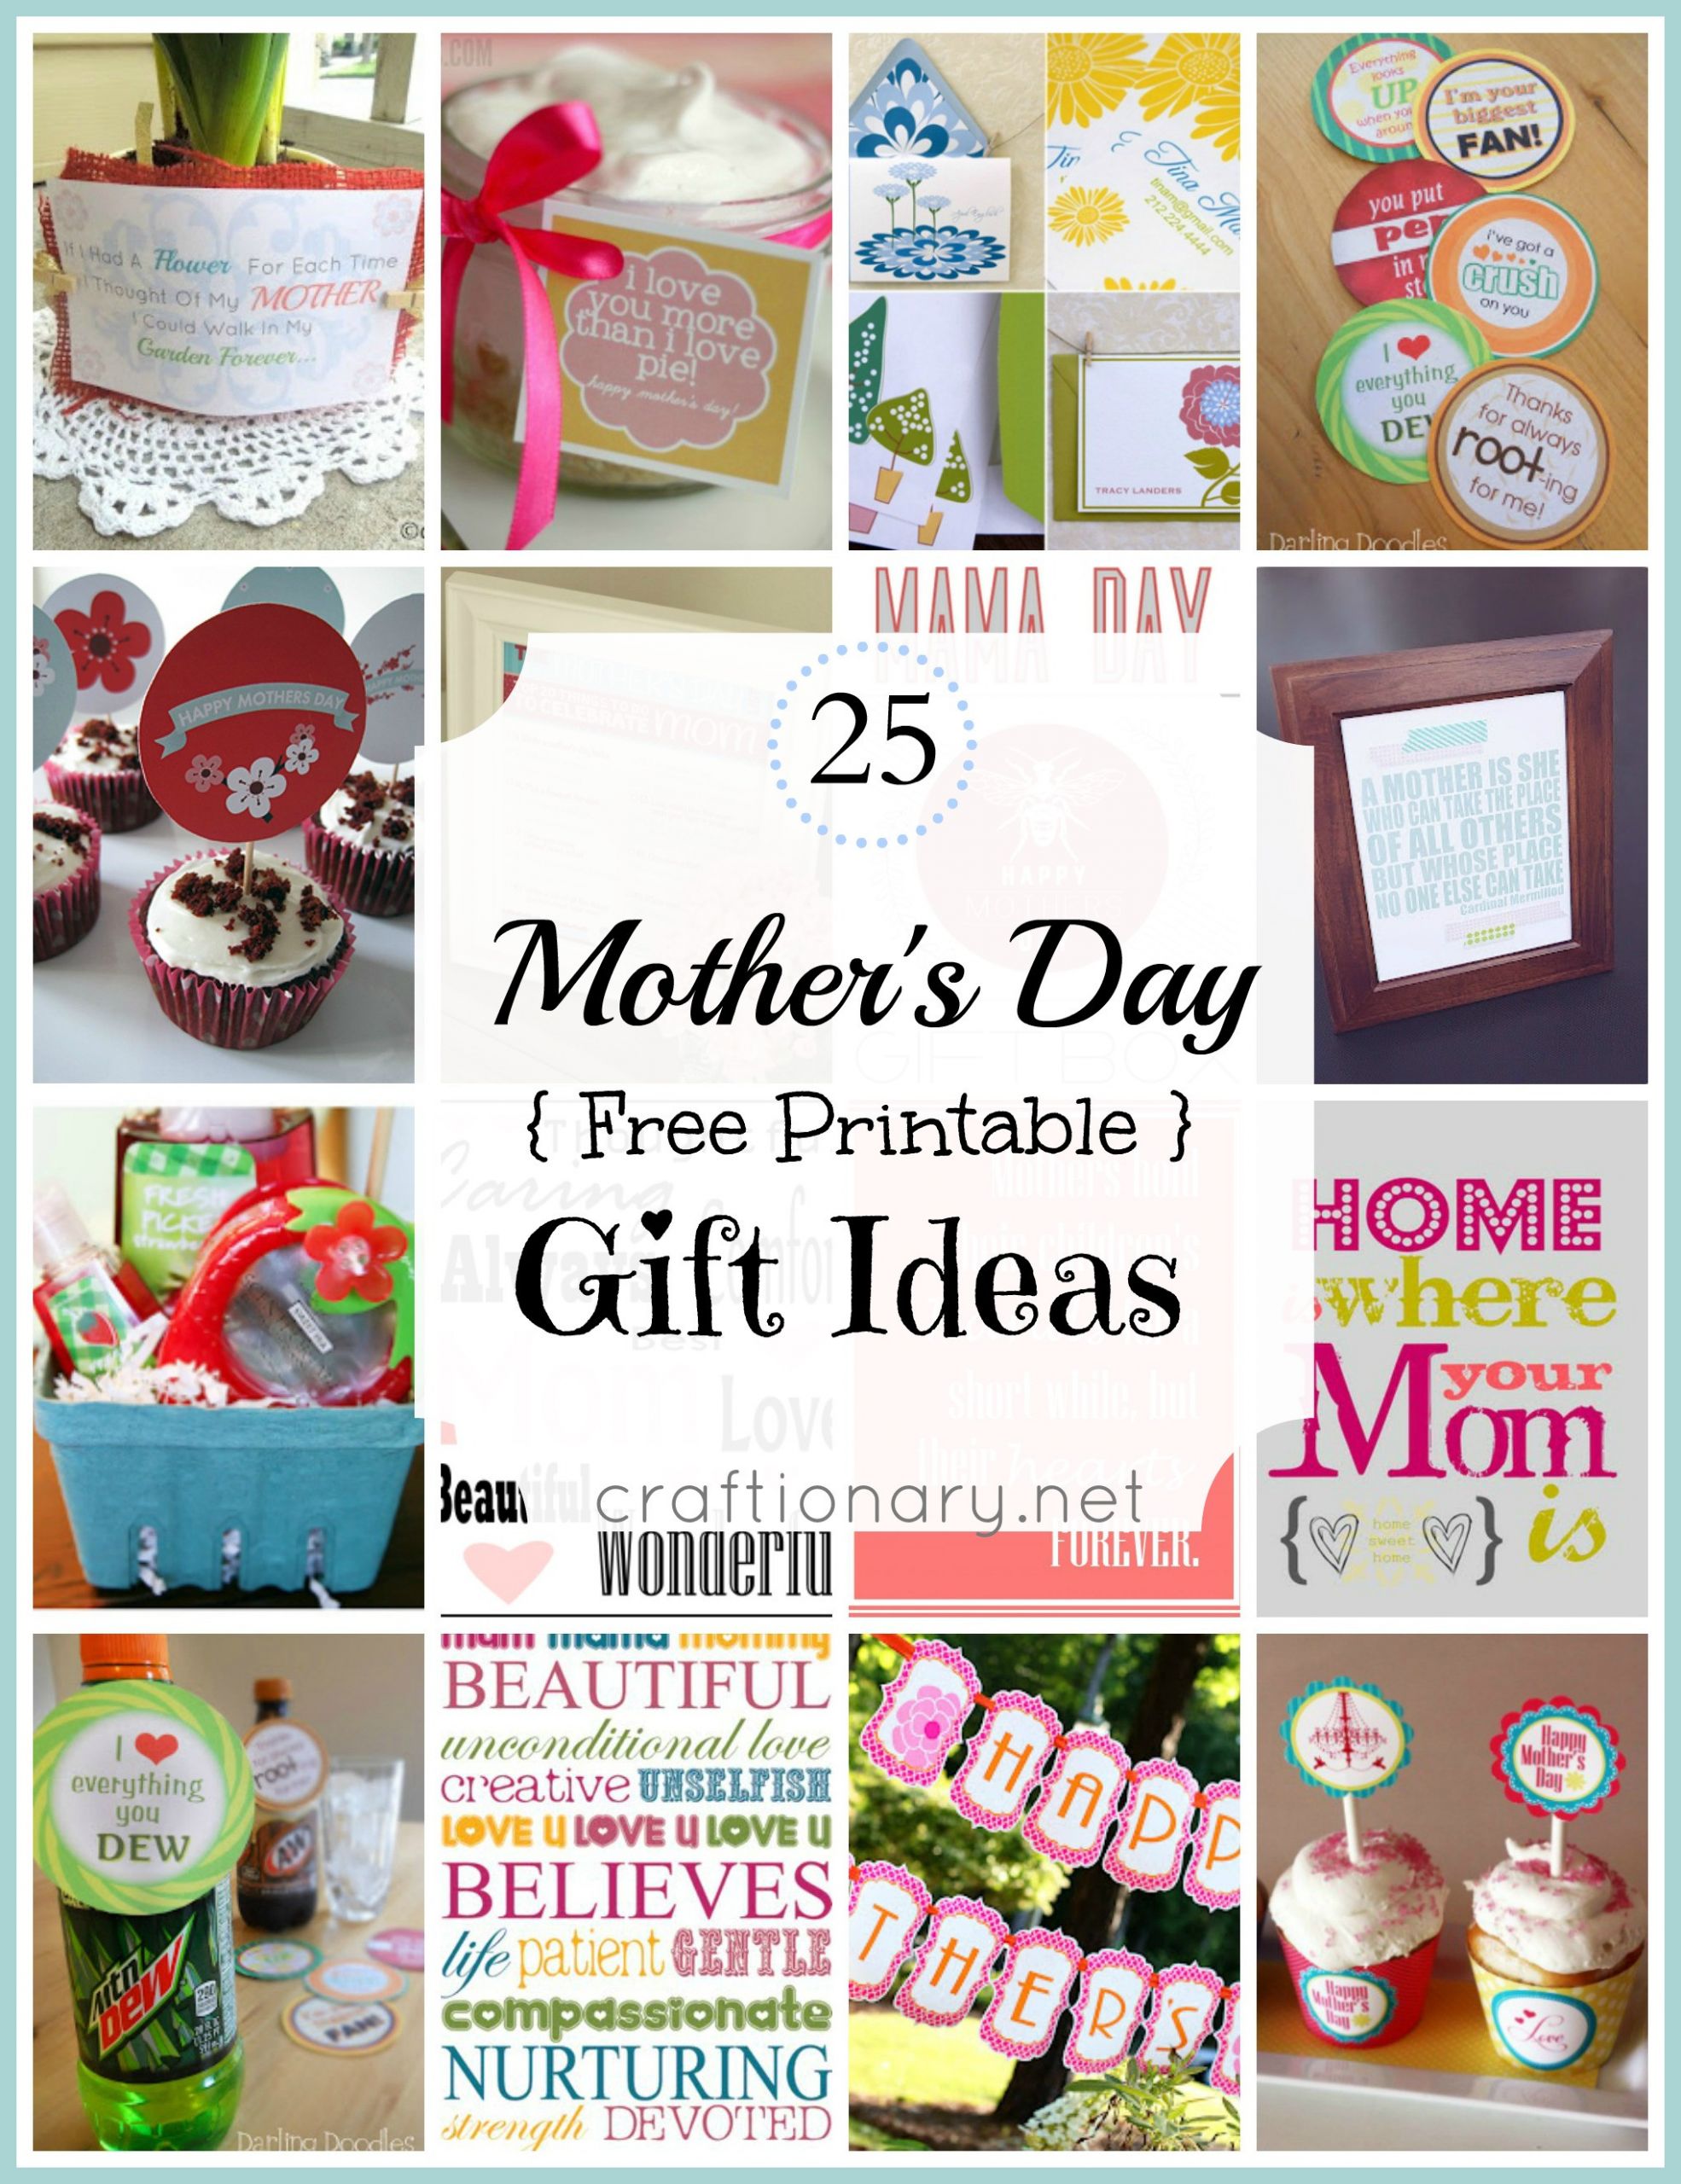 Great Mothers Day Gift Ideas
 Craftionary